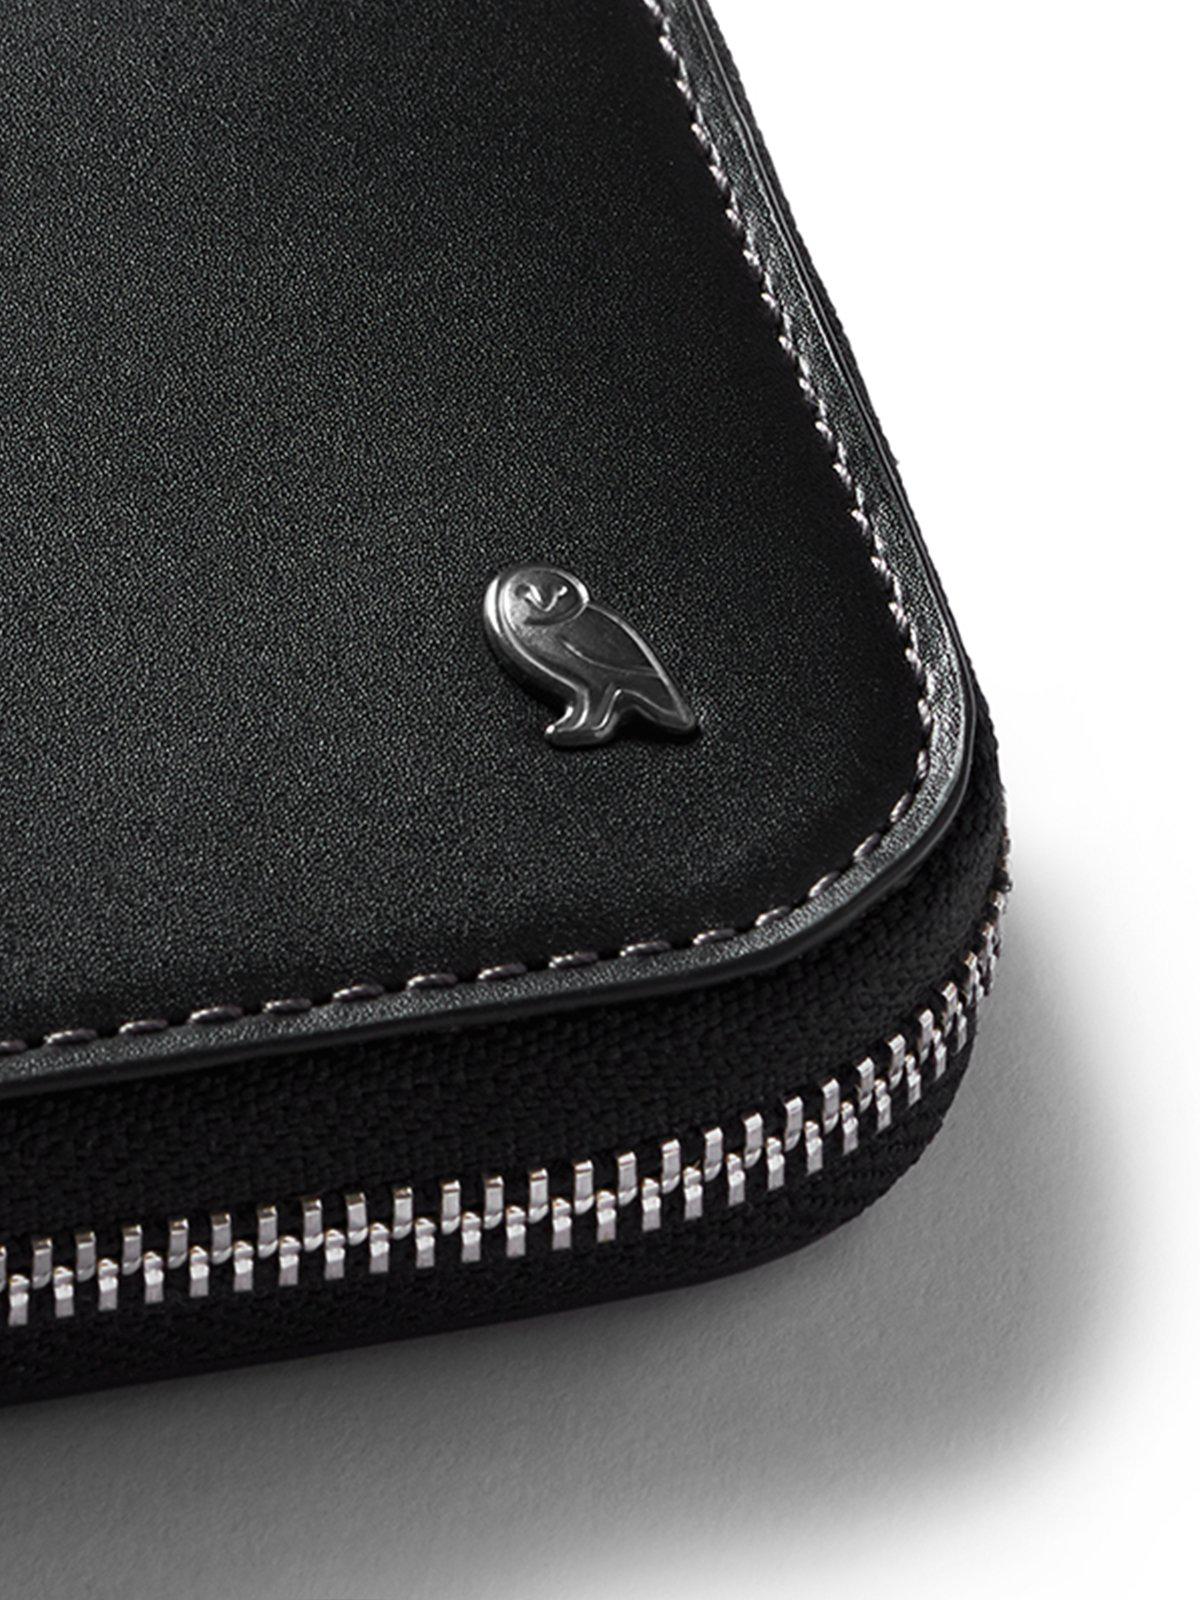 Bellroy Zip Wallet Black RFID - MORE by Morello Indonesia